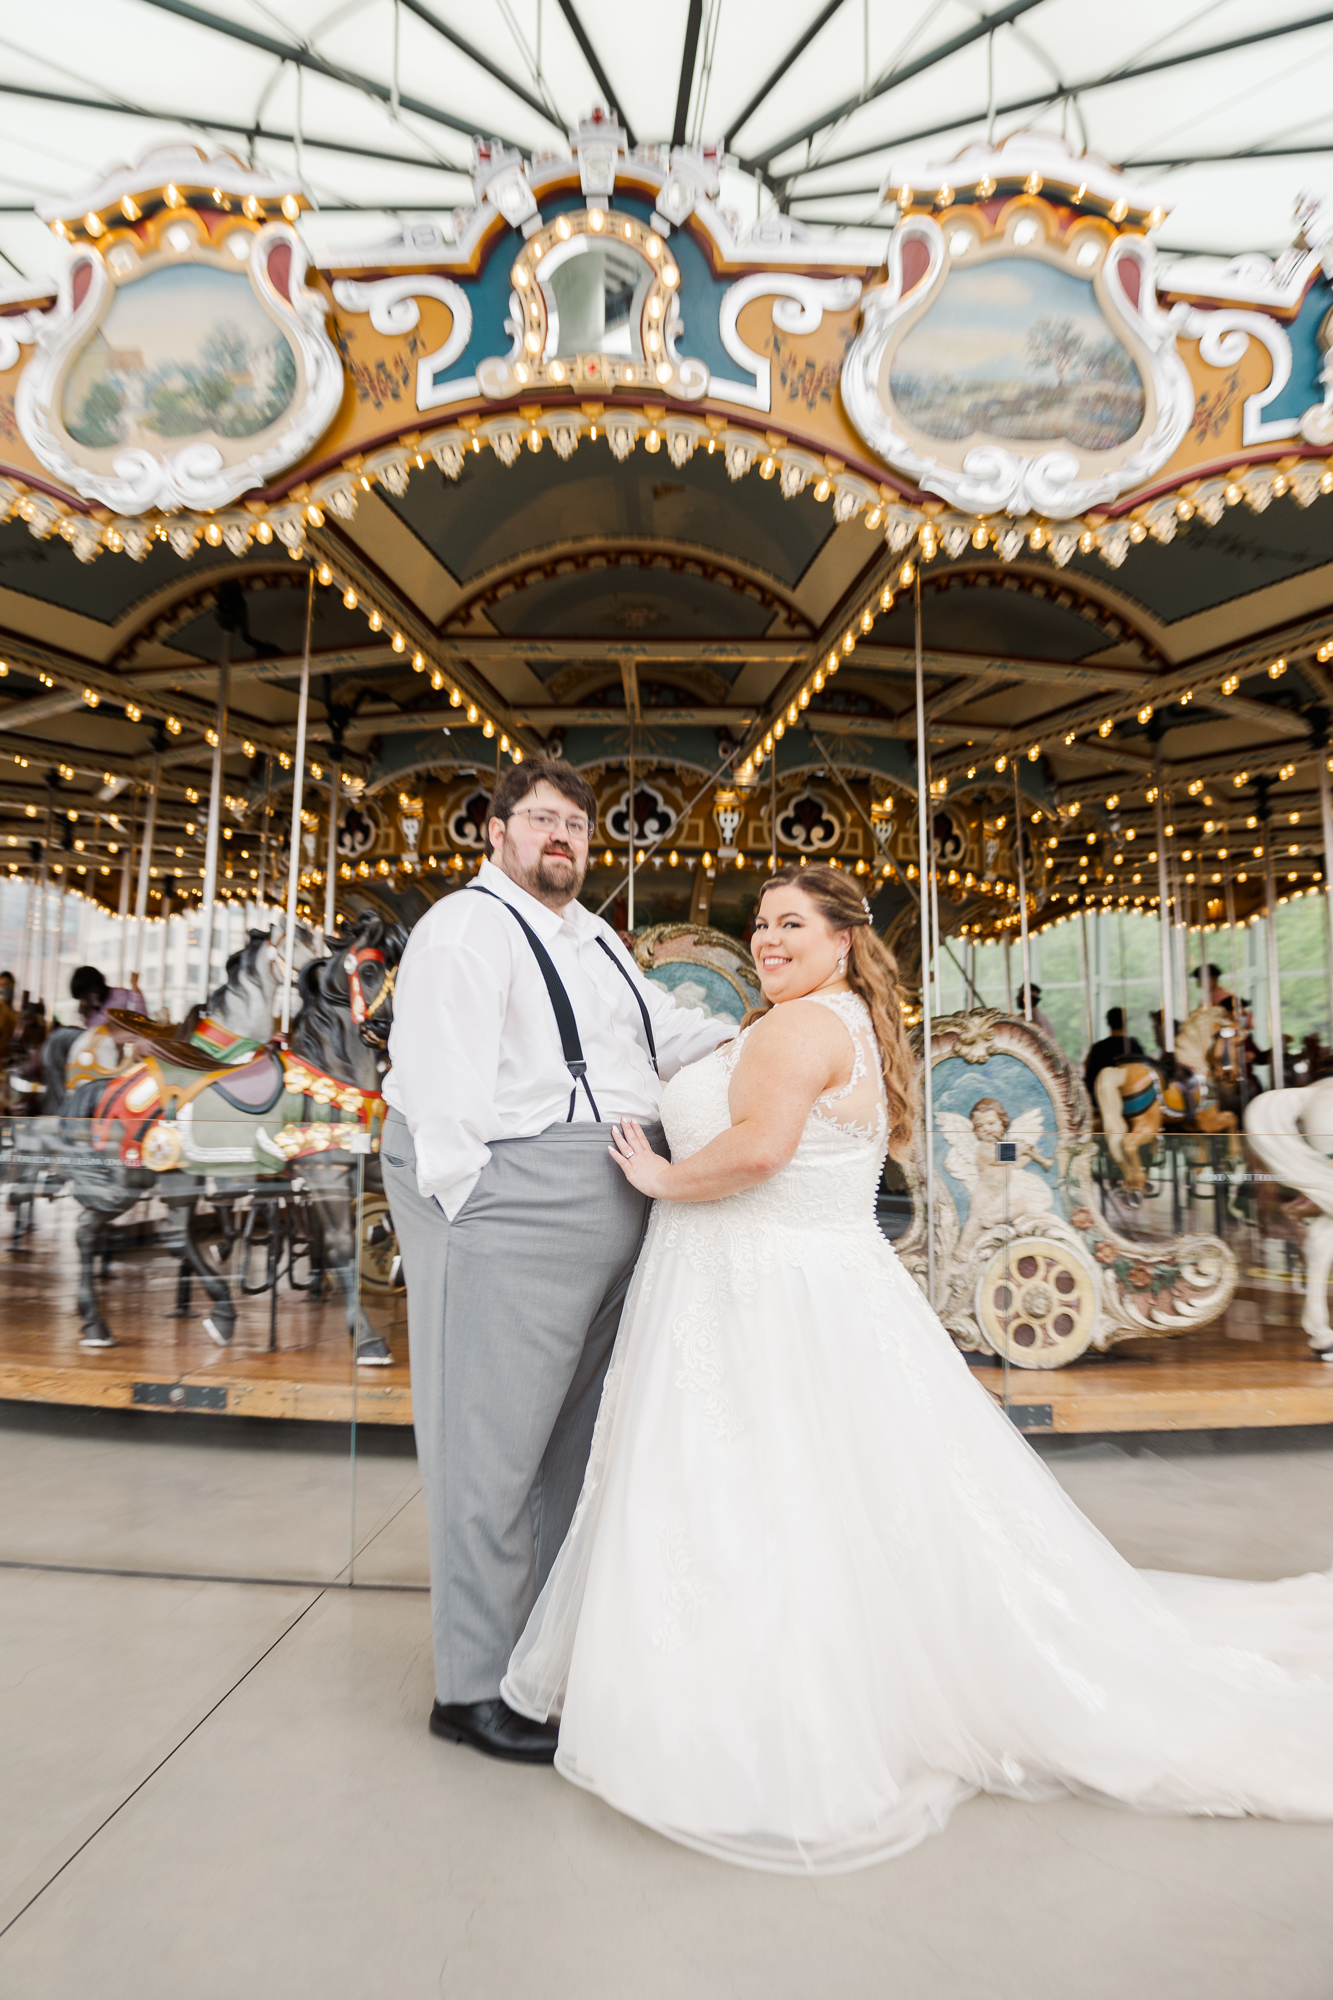 Awesome Jane\'s Carousel Wedding in New York